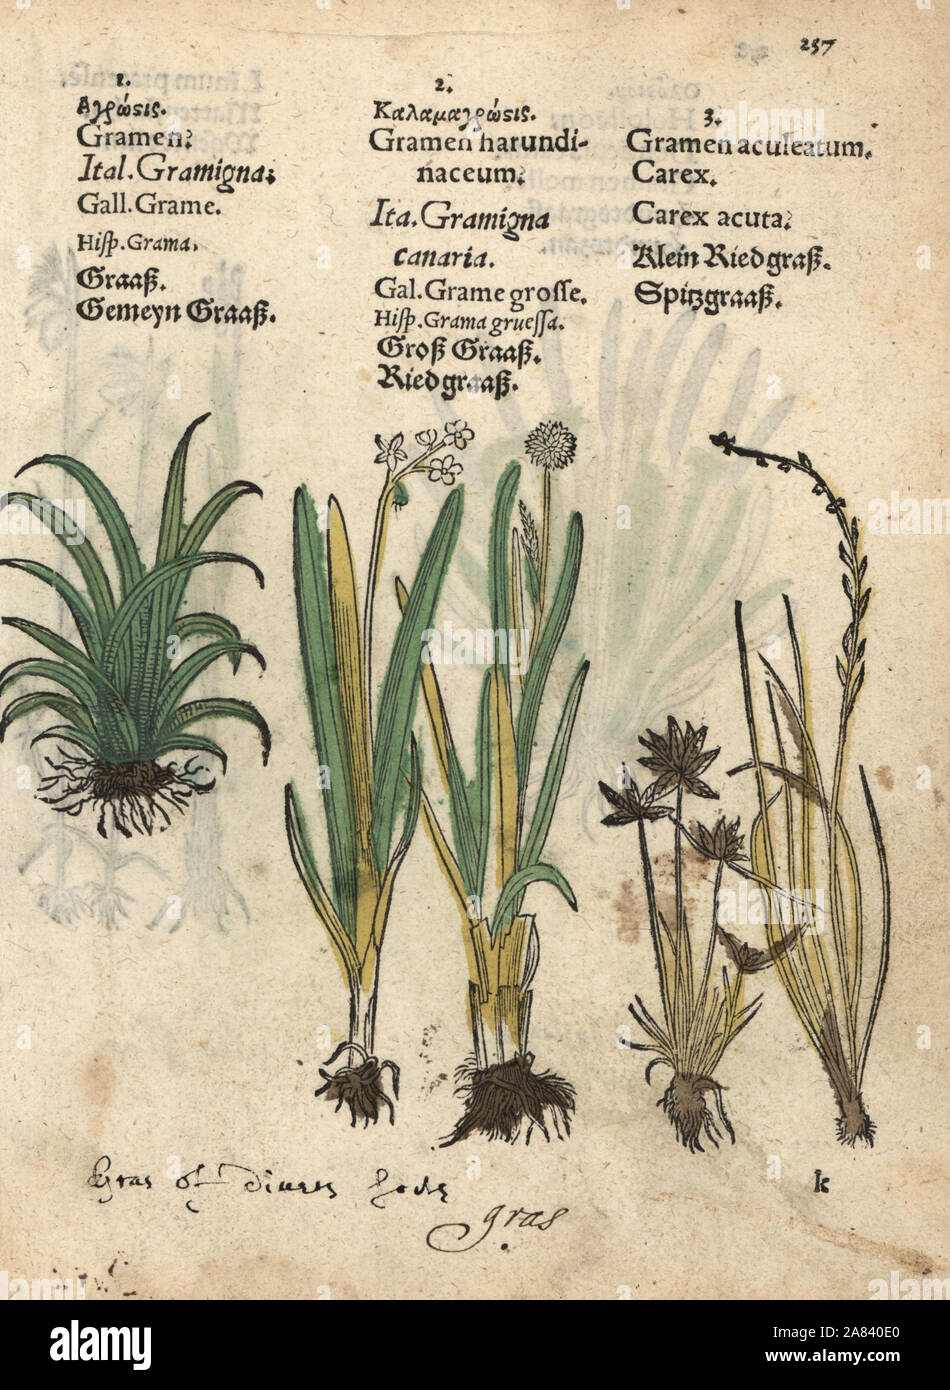 Reed grass and acute sedge, Carex acuta. Handcoloured woodblock engraving of a botanical illustration from Adam Lonicer's Krauterbuch, or Herbal, Frankfurt, 1557. This from a 17th century pirate edition or atlas of illustrations only, with captions in Latin, Greek, French, Italian, German, and in English manuscript. Stock Photo